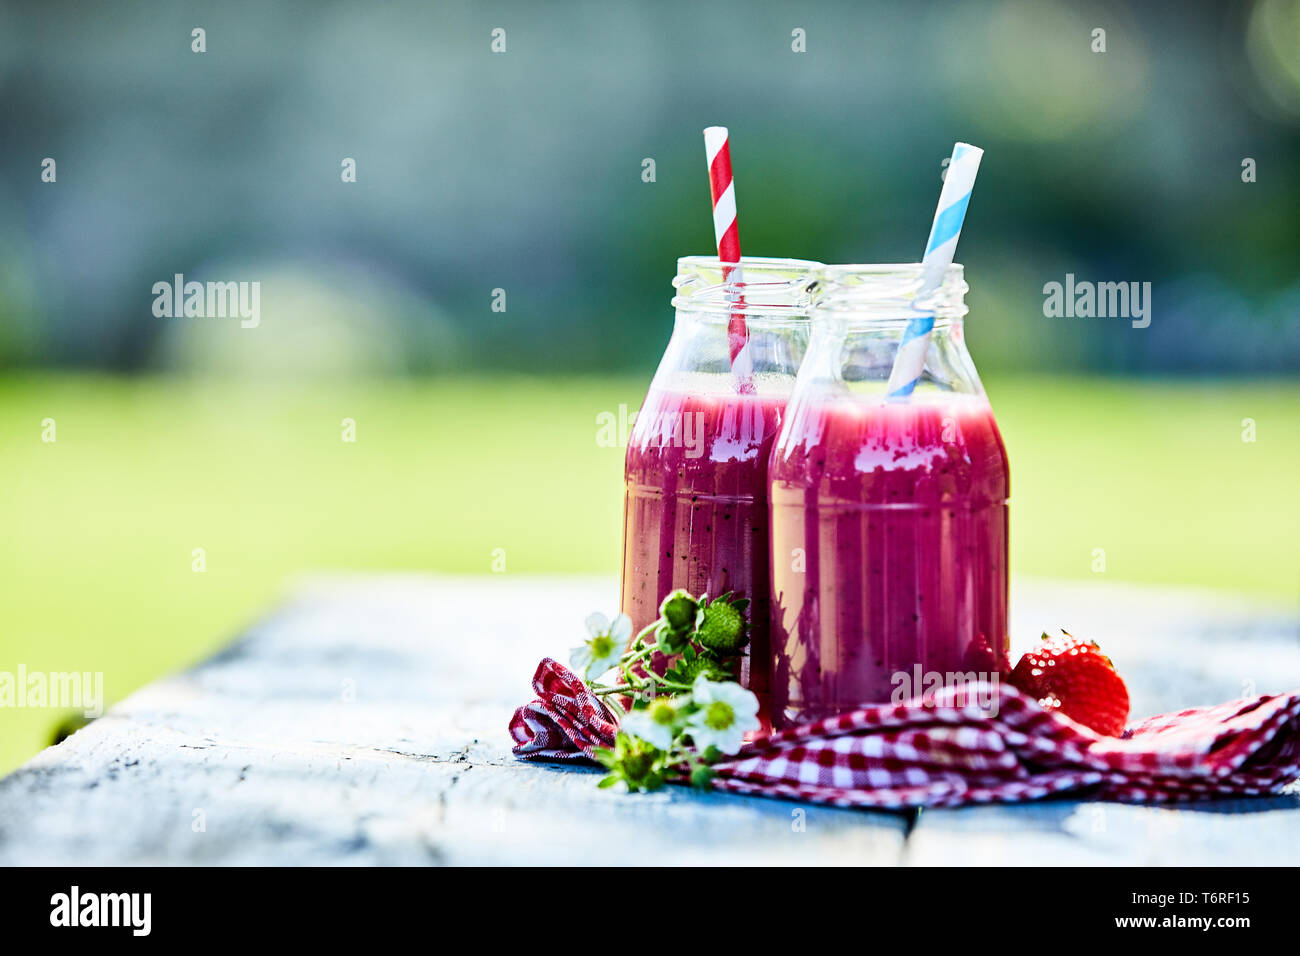 Bright, vibrant strawberry smoothies in glass jars on an outdoor summer picnic table setting. Stock Photo